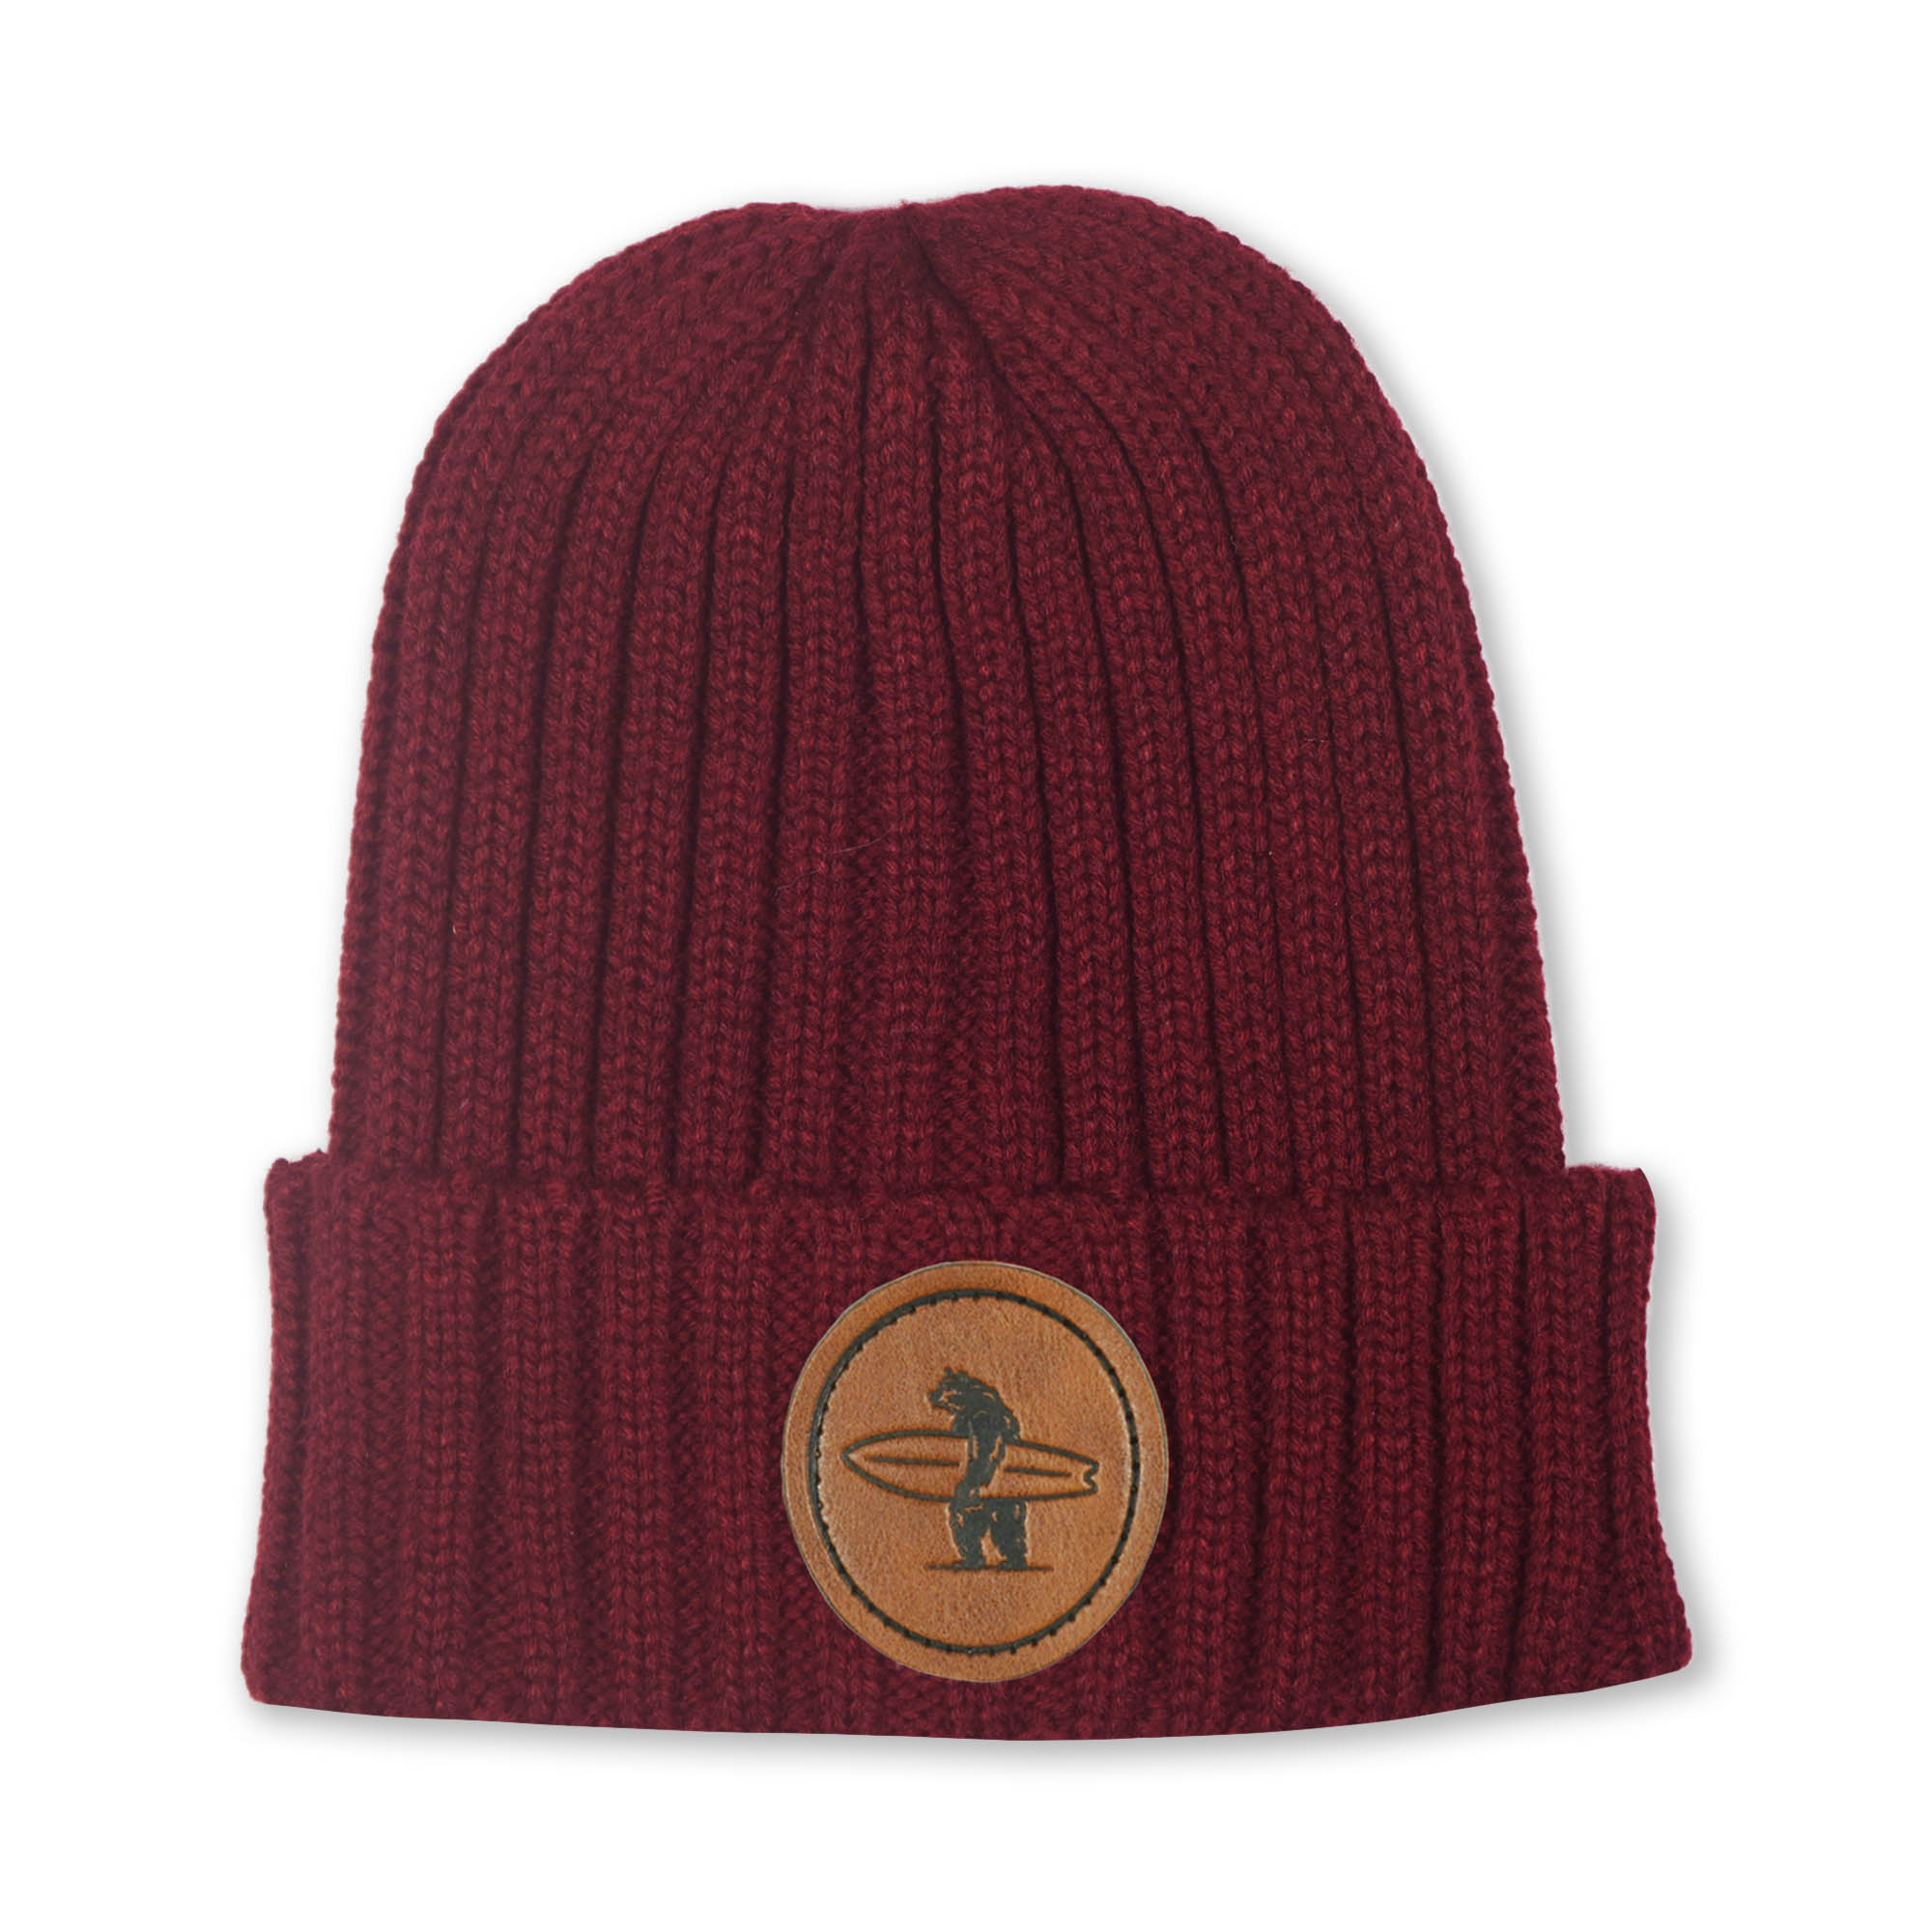 Maroon Pismo Beanie by Everyday California with vegan leather patch